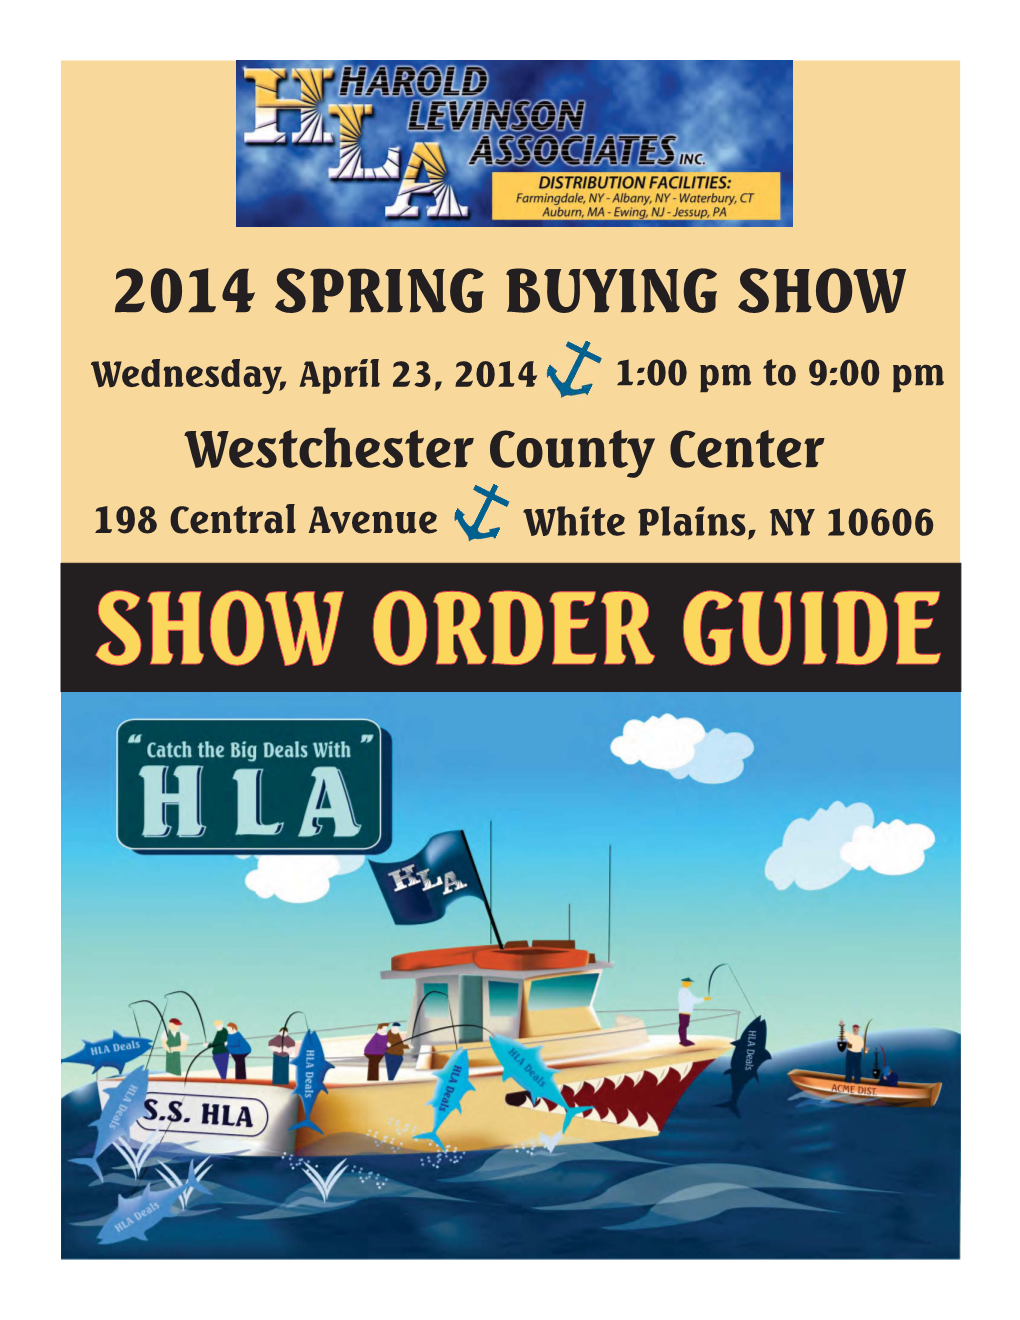 SHOW ORDER GUIDE “Catch the Big Deals with HLA”